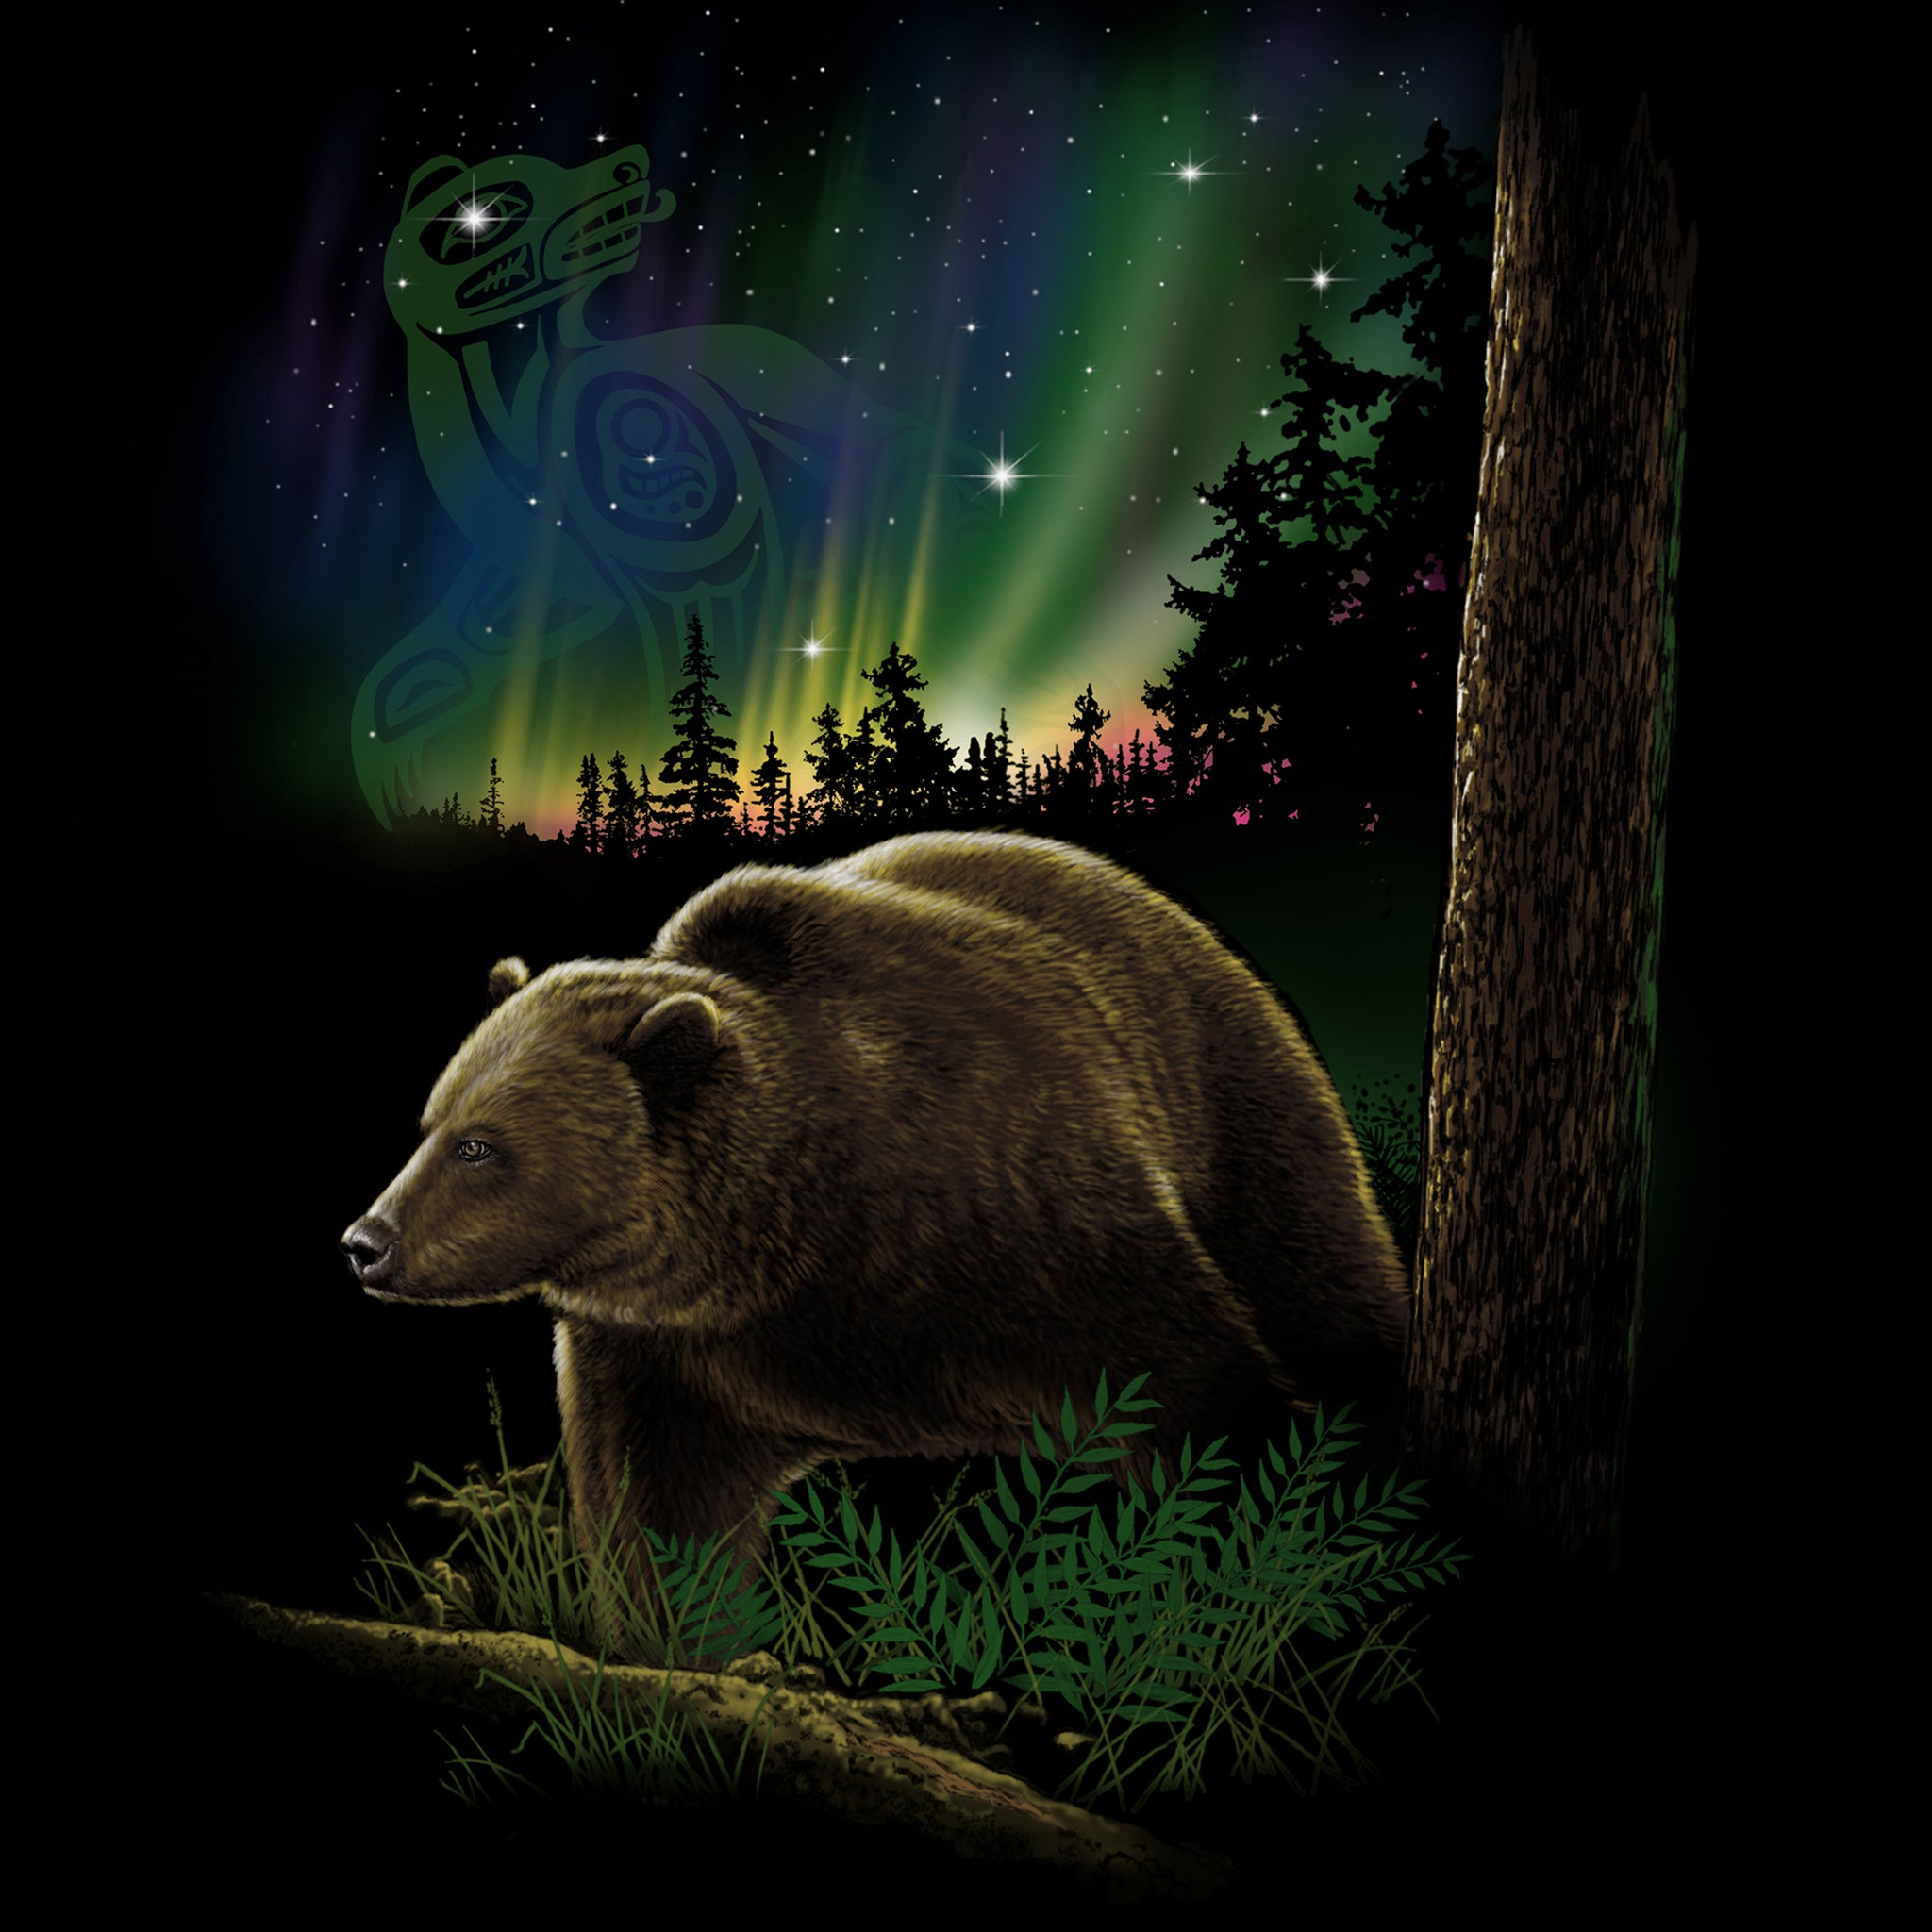 Native Grizzly by Eric Blais - painting of a grizzly bear in the woods with Northern Lights and native symbol